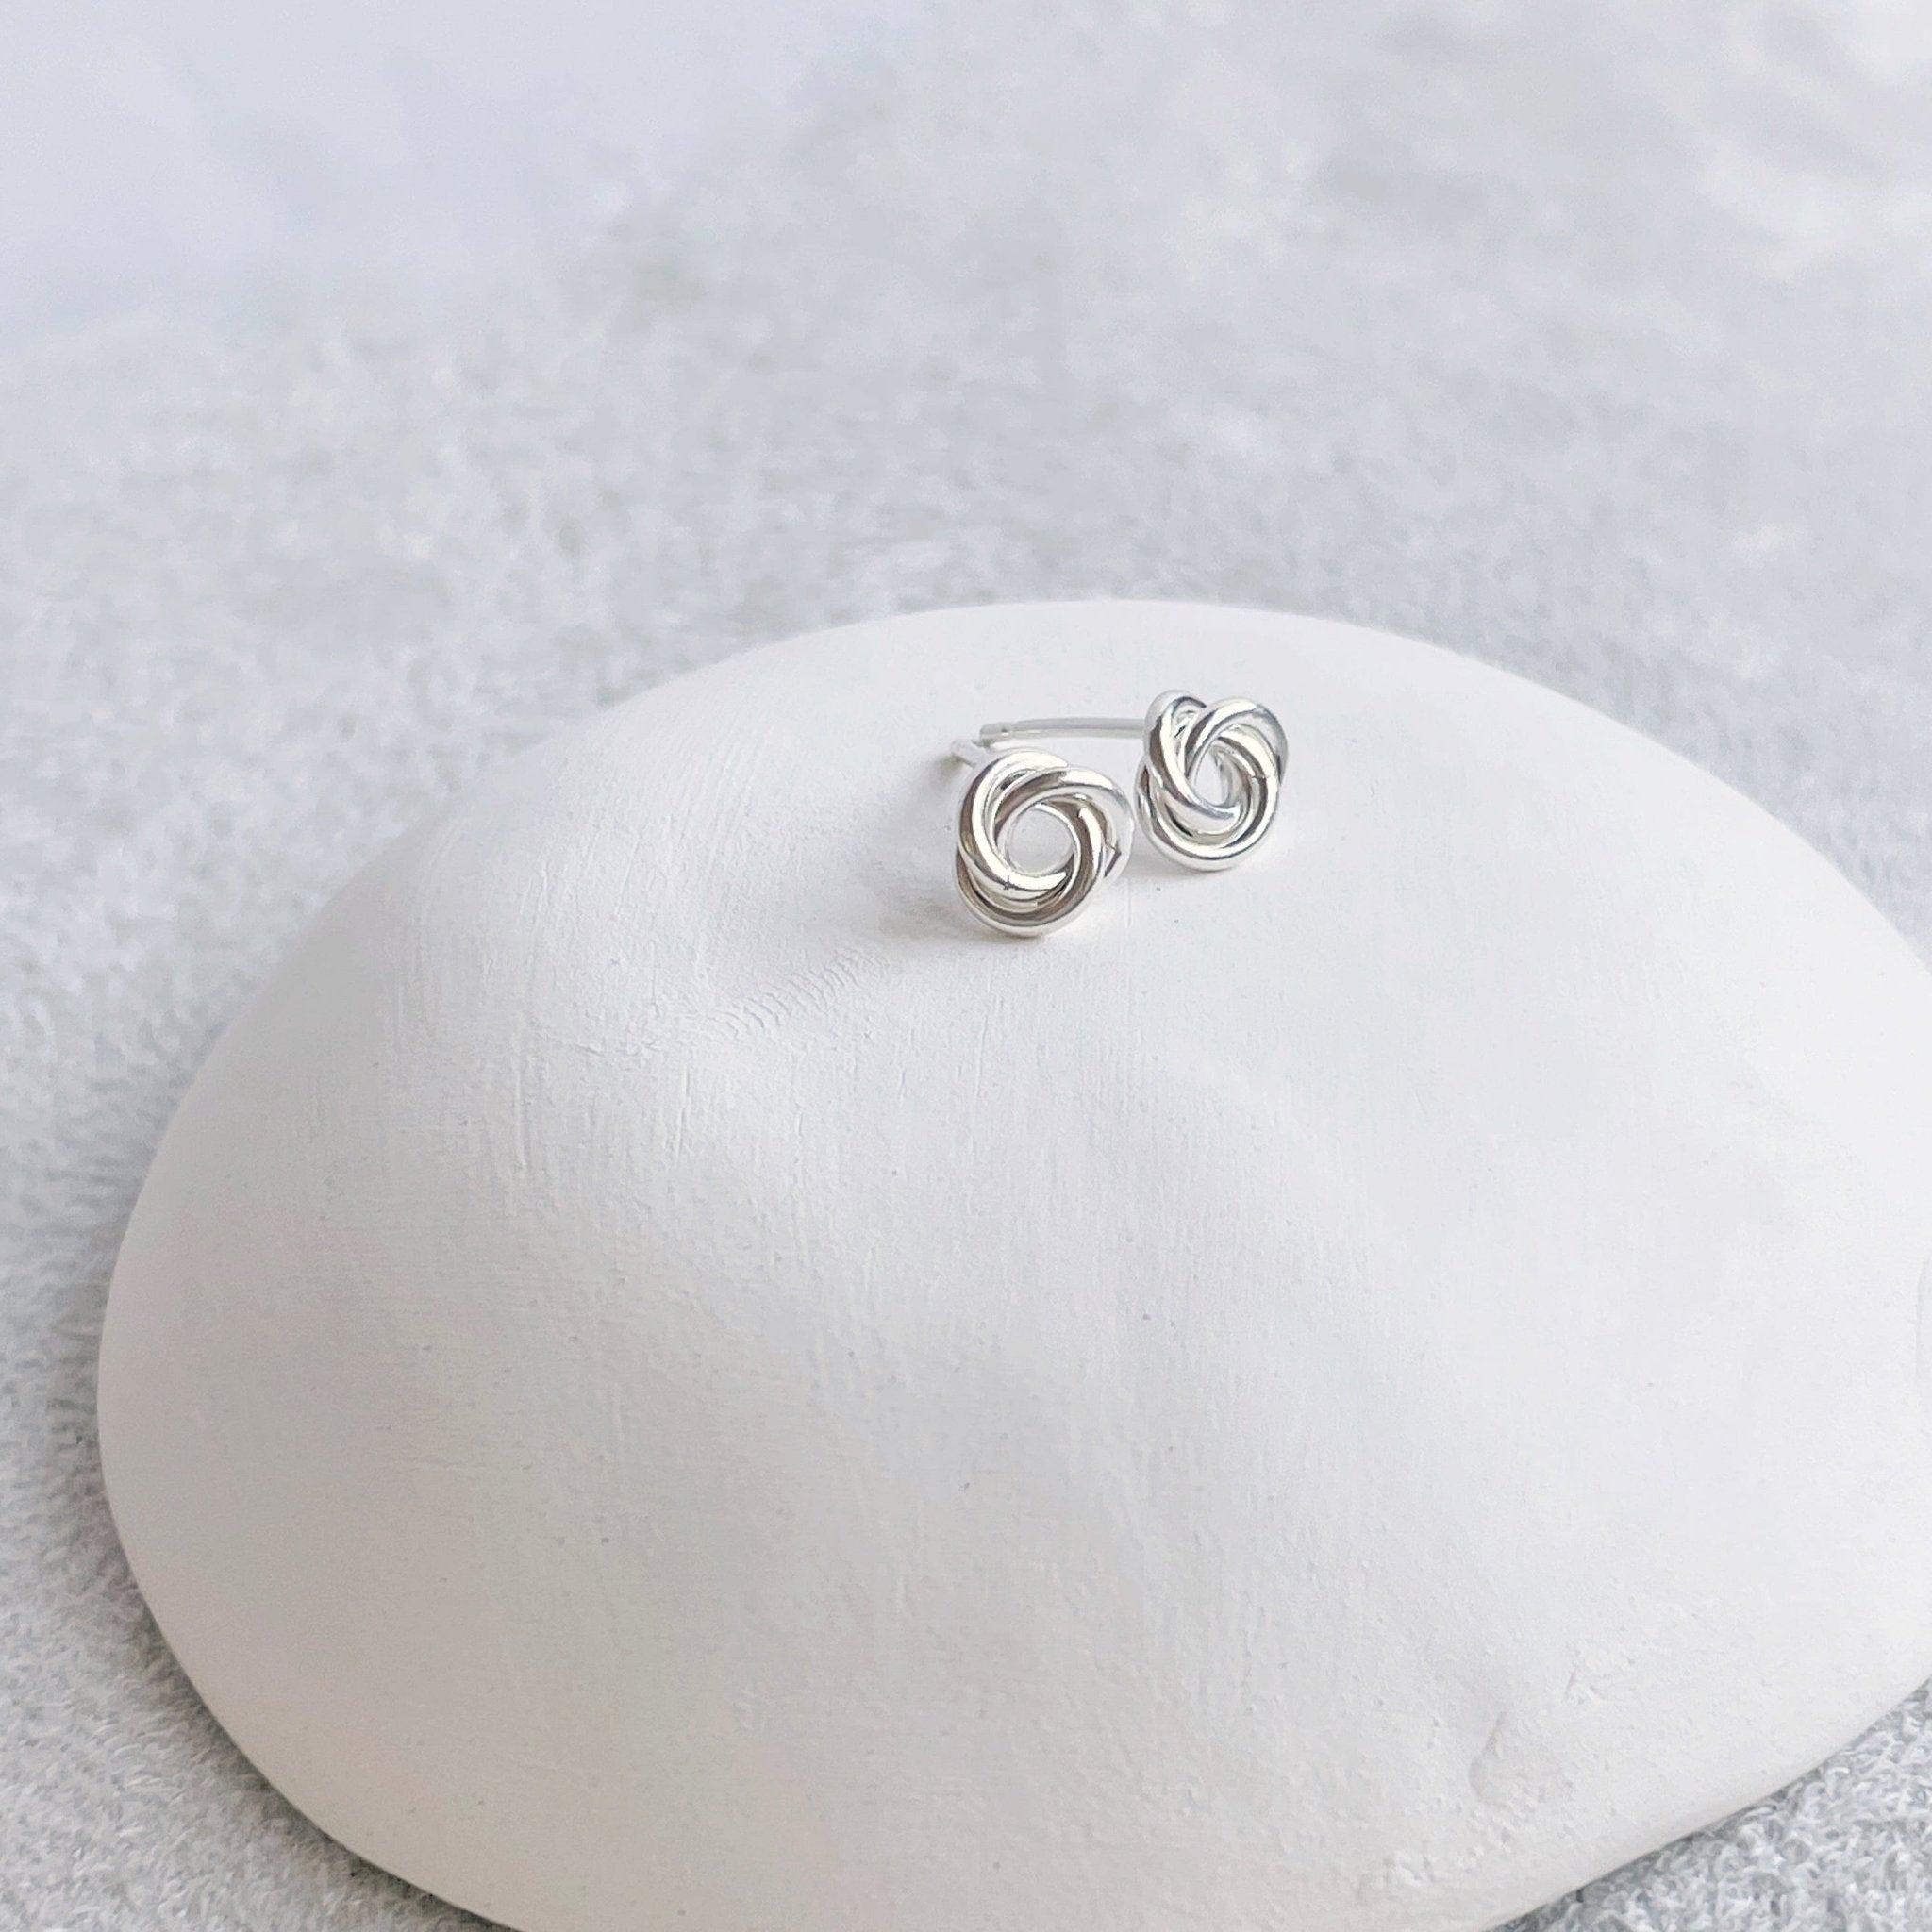 6 mm silver love knot stud earrings. Love Knot Studs by Sarah Cornwell Jewelry